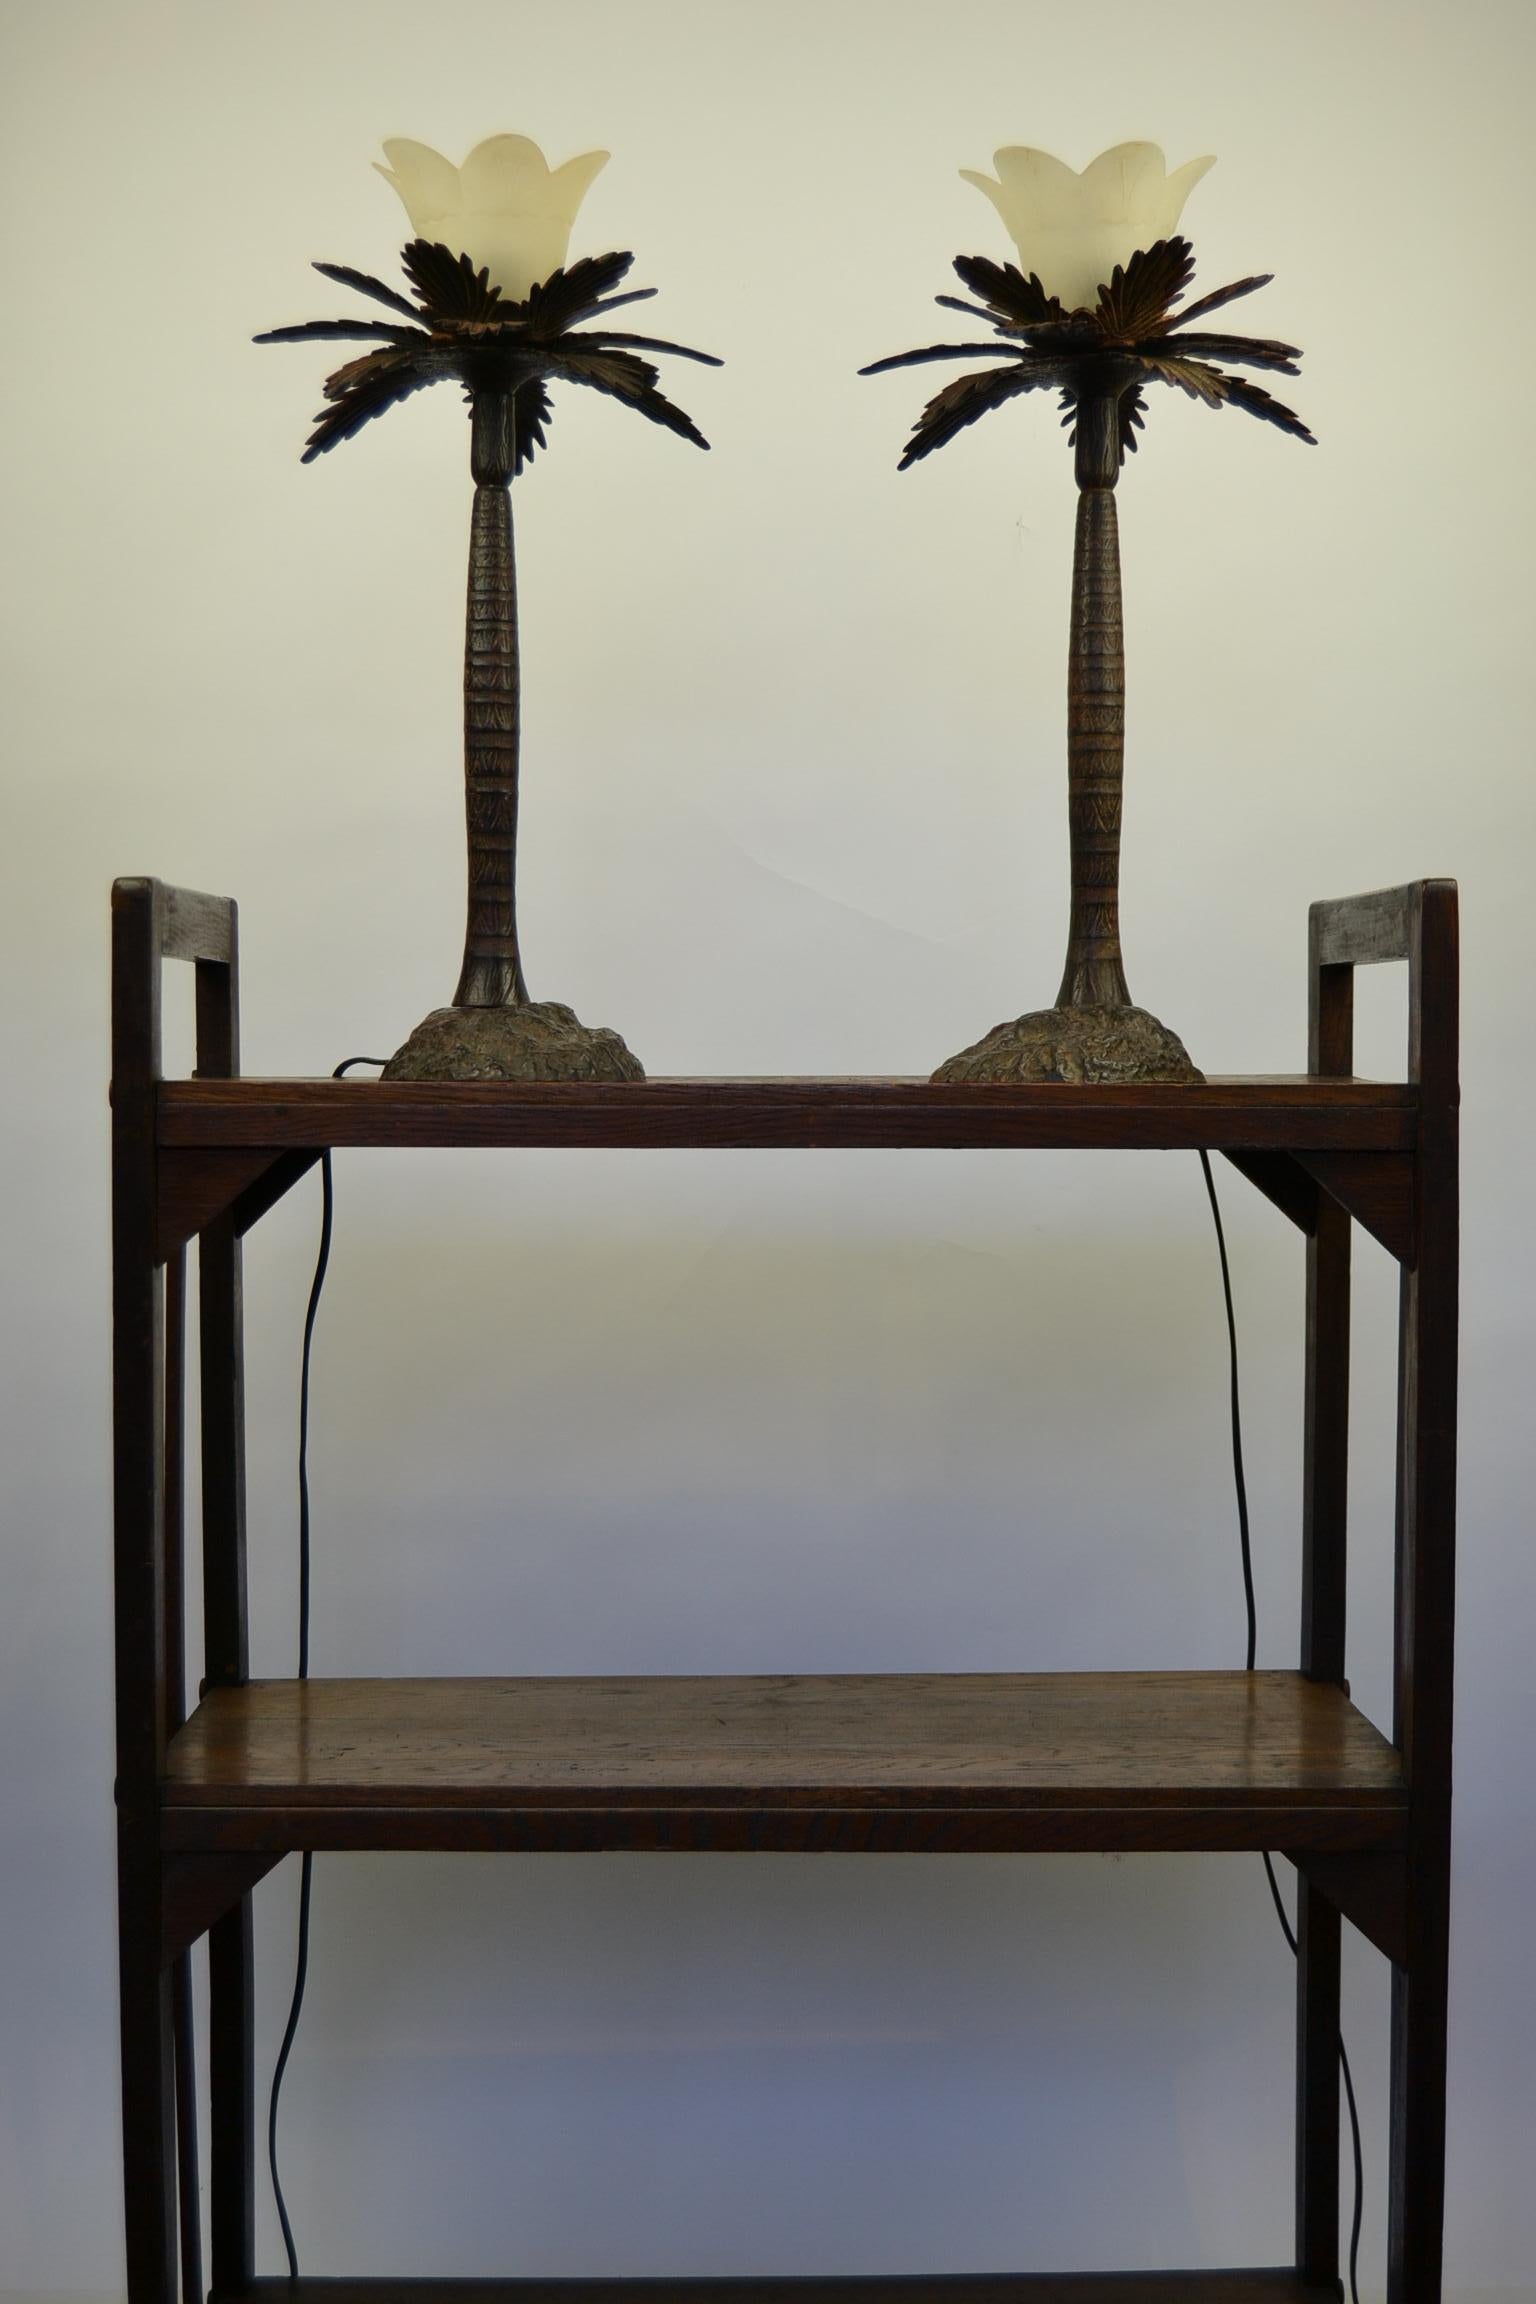 Pair of Brutalist Palm Tree Table Lamps. 
This Palm Tree Table Sculptures date circa 1950s-1960s.
They have Fine detailed Trunk and Leafs. 
Made of Heavy Metal - Cast metal - Painted Metal with Frosted Art Glass Shades. 

Stylish Pair of Palmtree